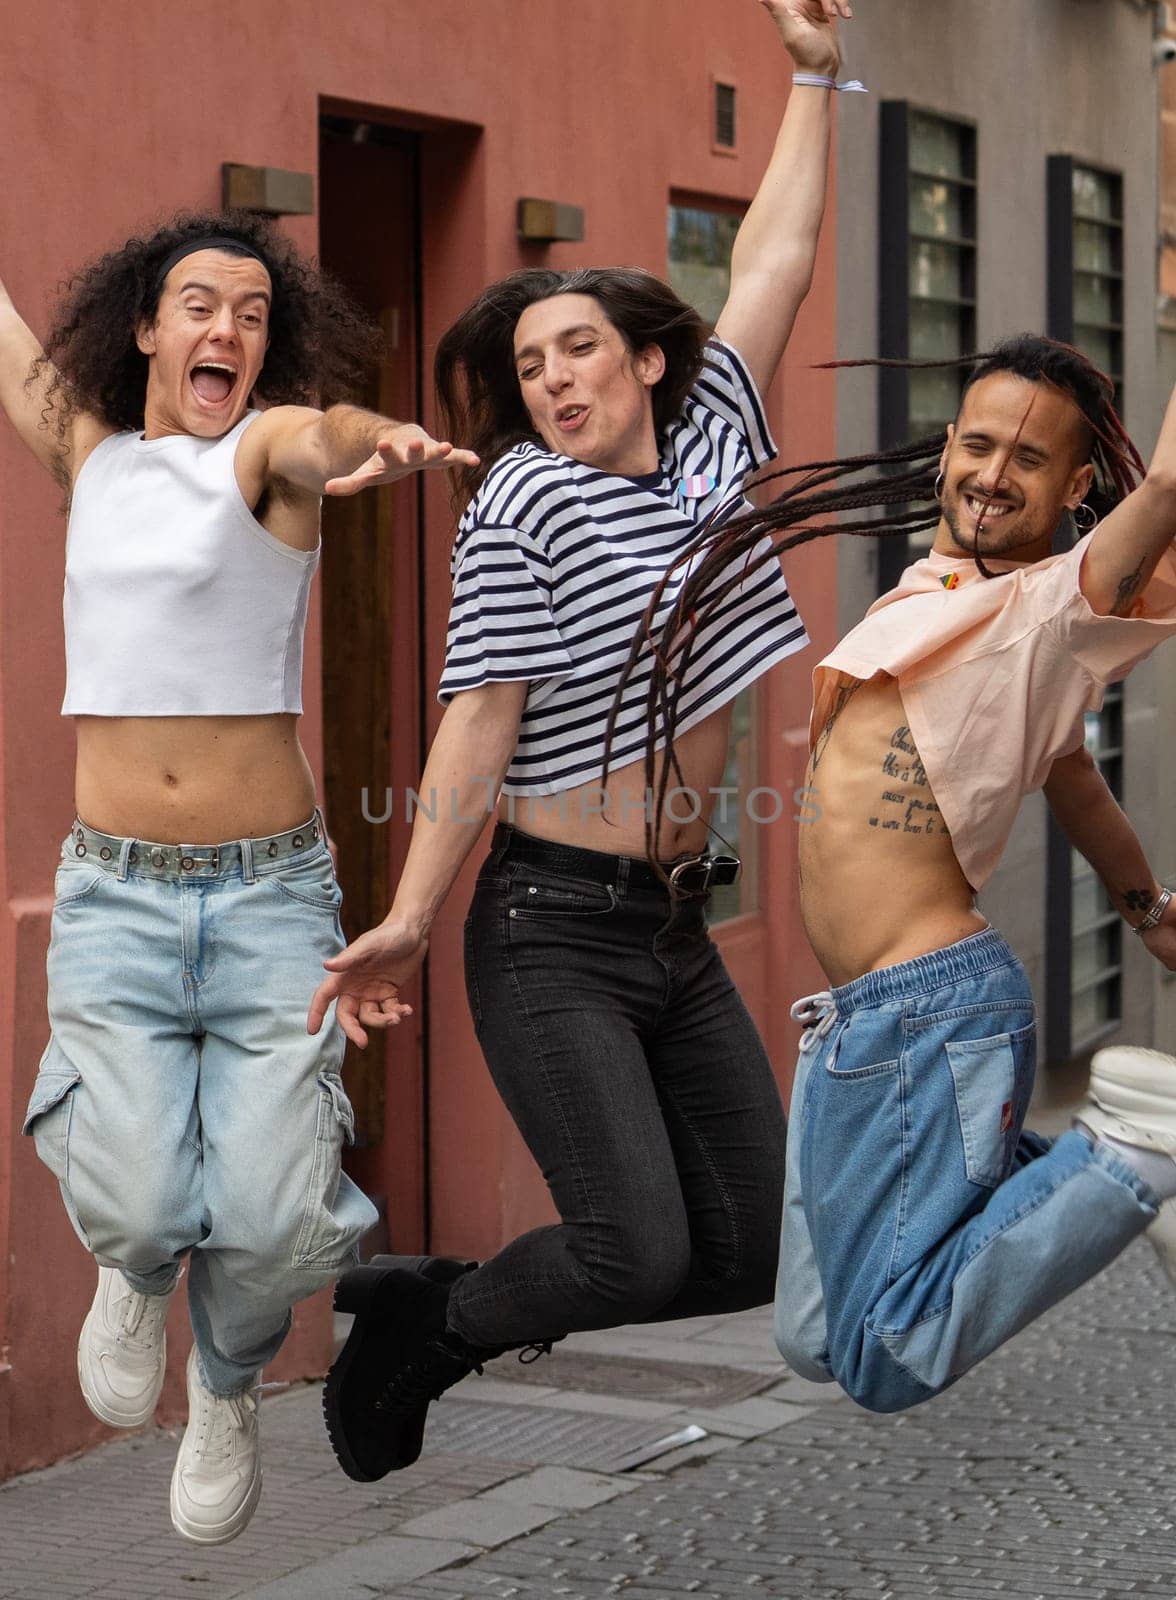 Three multuethnic gay people are excited together in Madrid city chueca street.